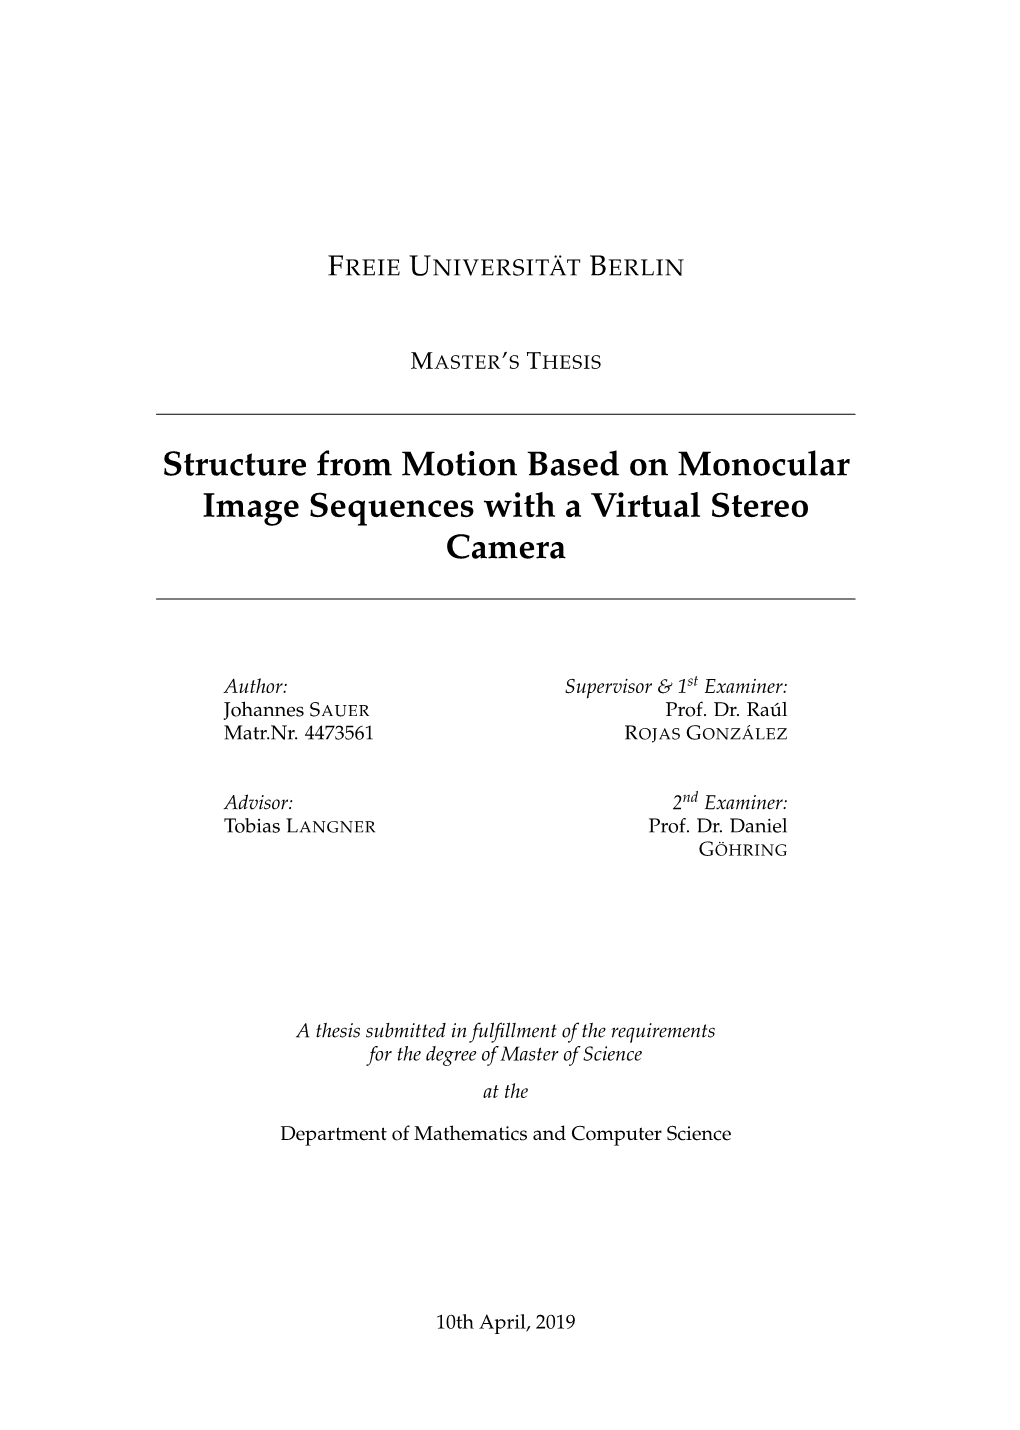 Structure from Motion Based on Monocular Image Sequences with a Virtual Stereo Camera